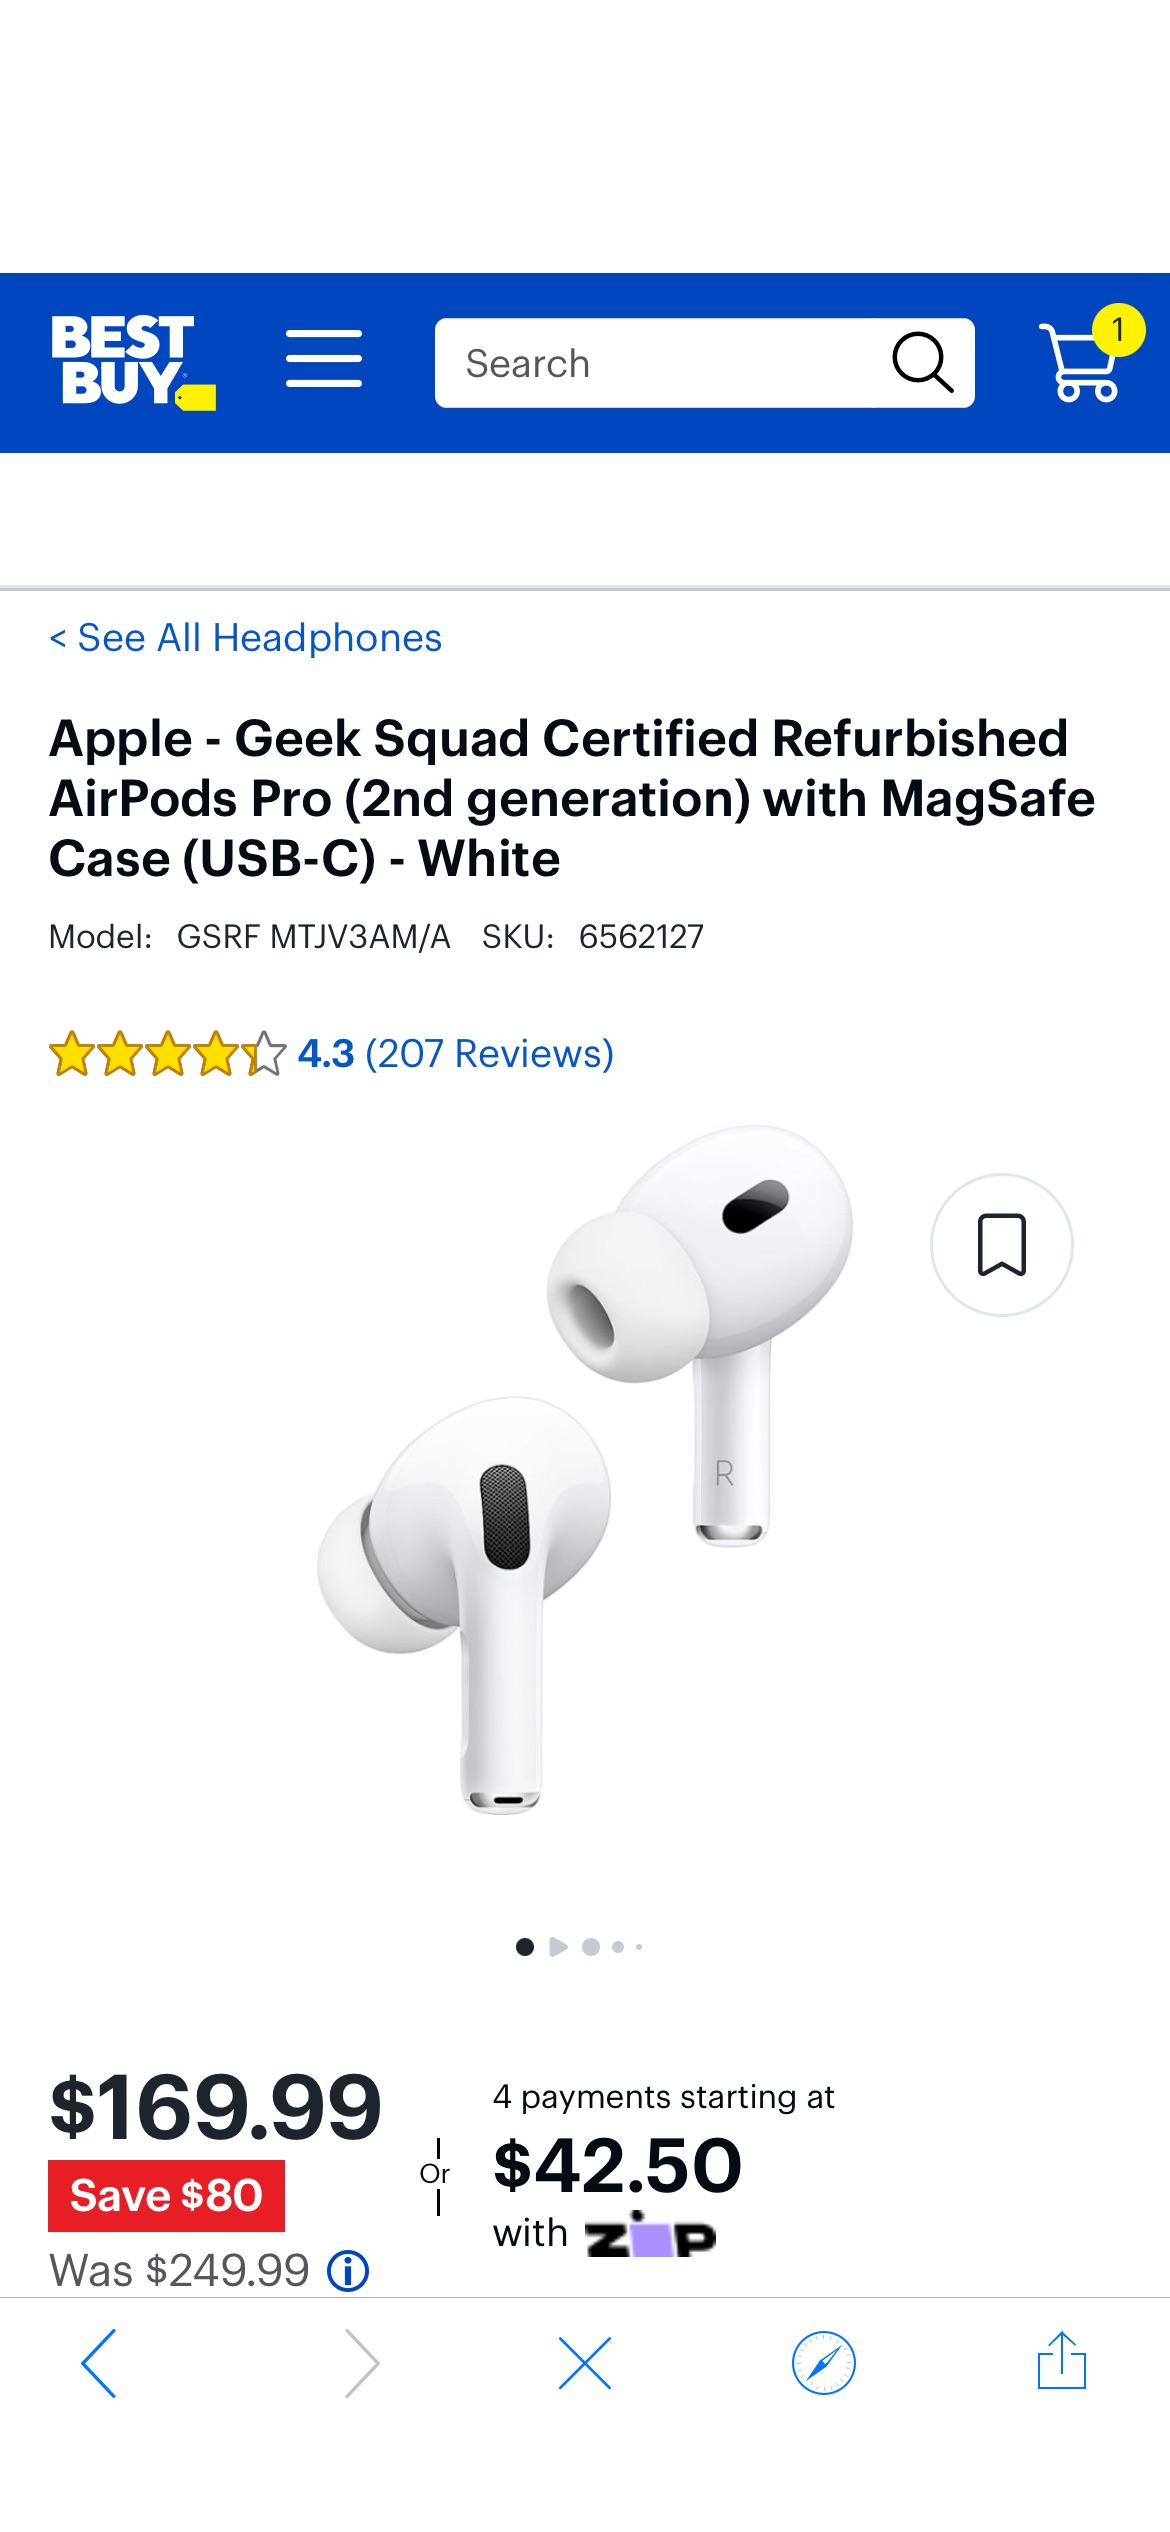 Apple Geek Squad Certified Refurbished AirPods Pro (2nd generation) with MagSafe Case (USB‑C) White GSRF MTJV3AM/A - Best Buy